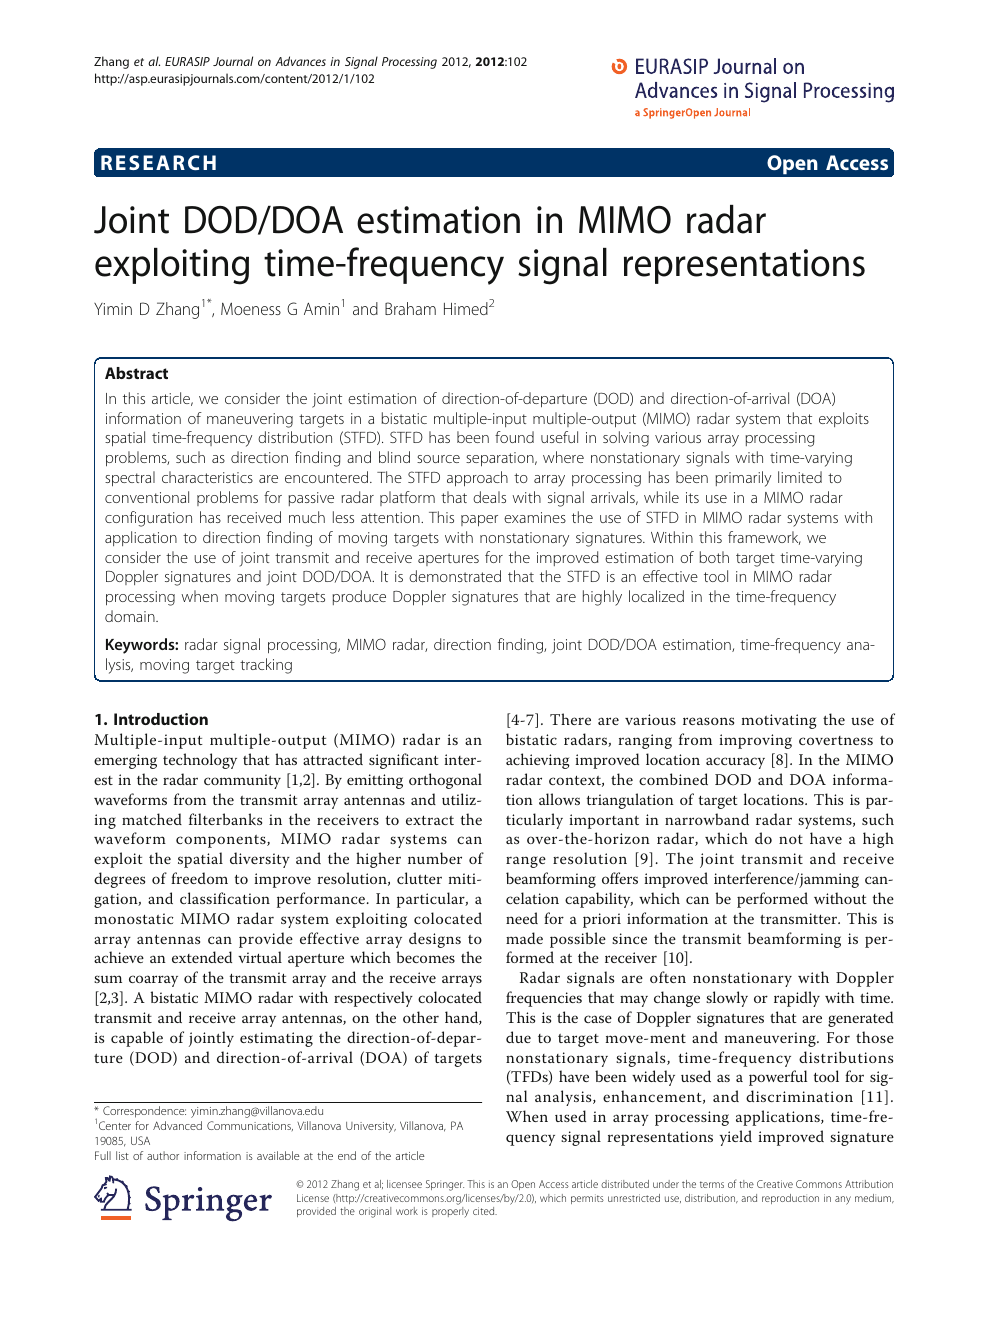 Joint Dod Doa Estimation In Mimo Radar Exploiting Time Frequency Signal Representations Topic Of Research Paper In Computer And Information Sciences Download Scholarly Article Pdf And Read For Free On Cyberleninka Open Science